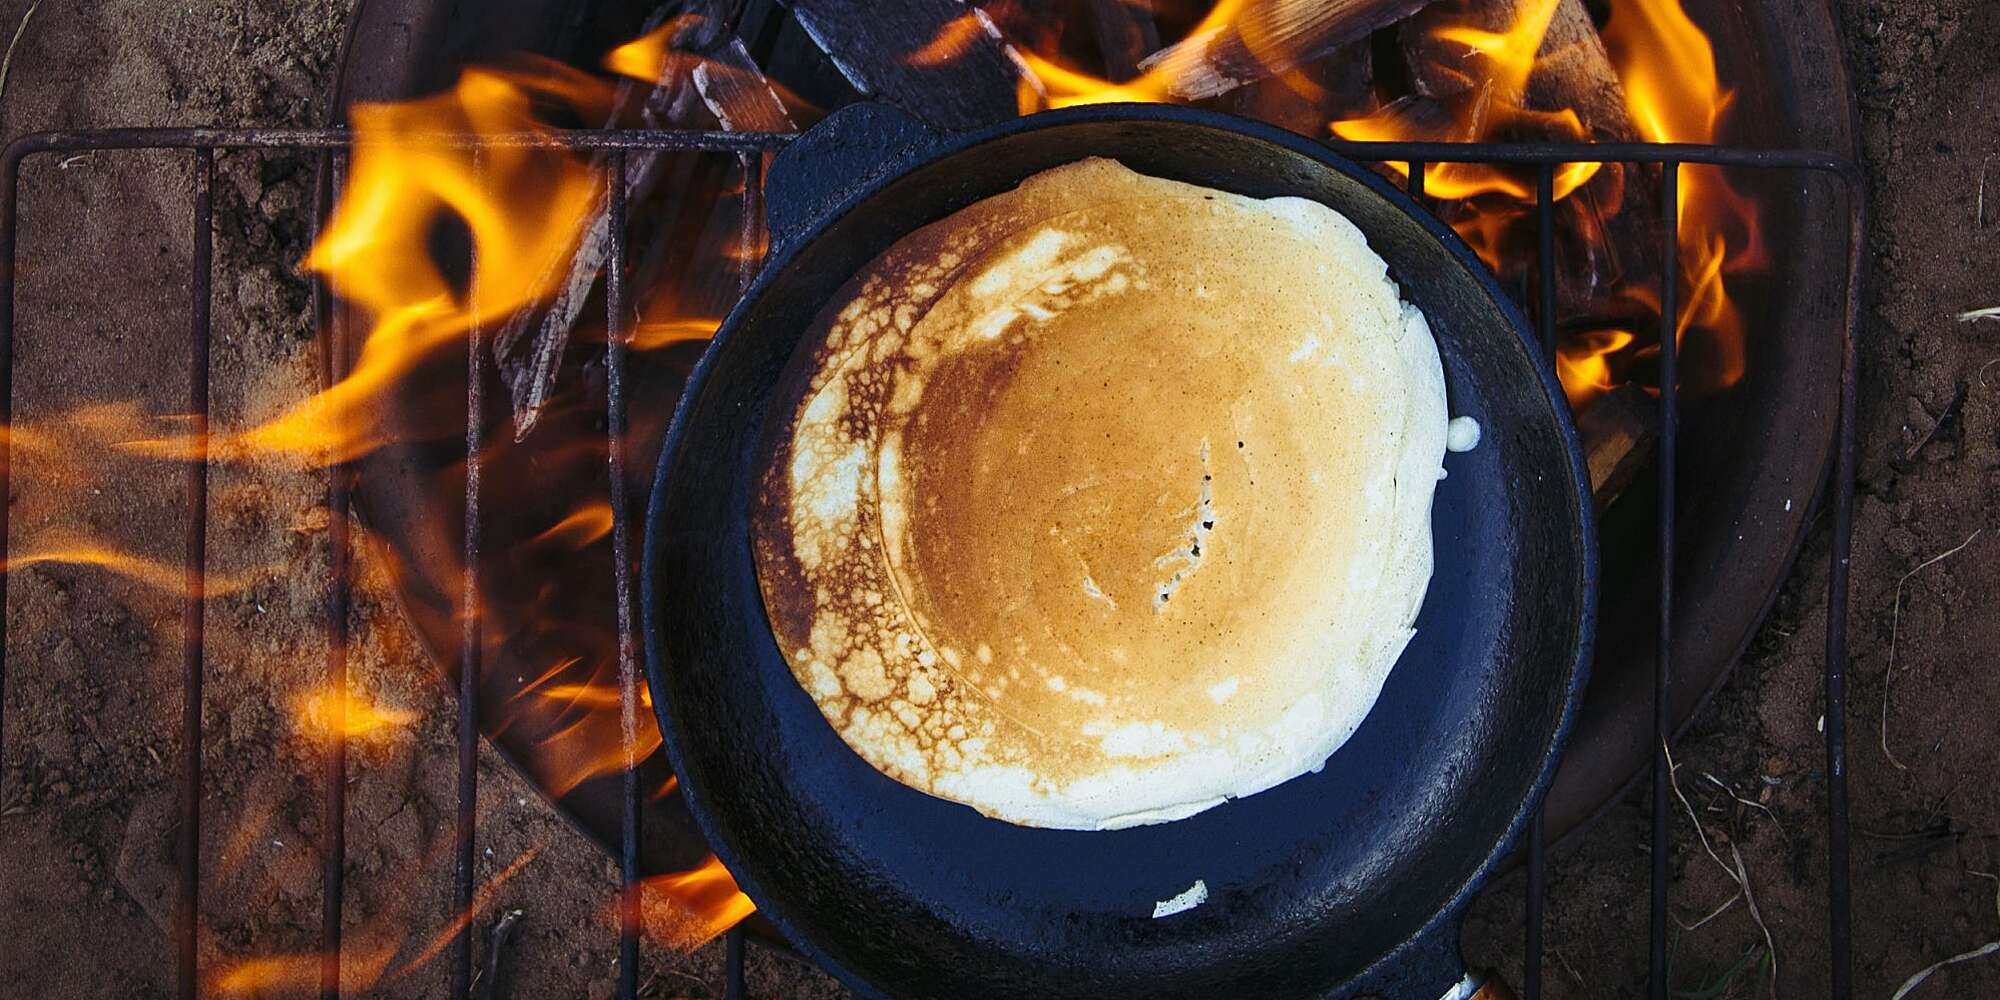 We Put These Indoor Grills to the Test And Cooked Pancakes